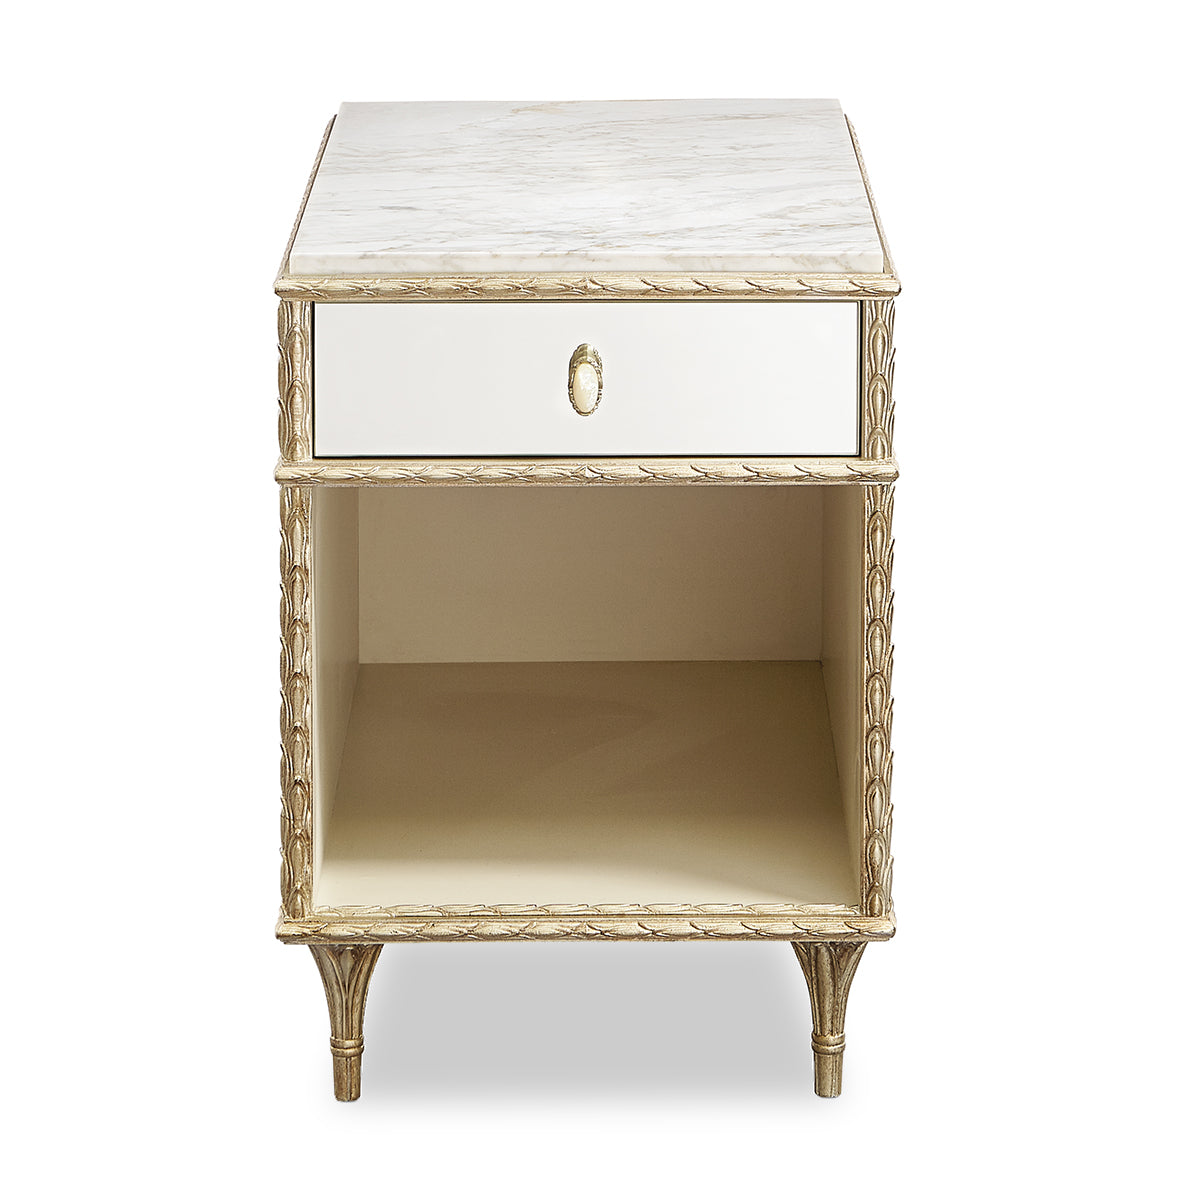 FONTAINEBLEAU END TABLE